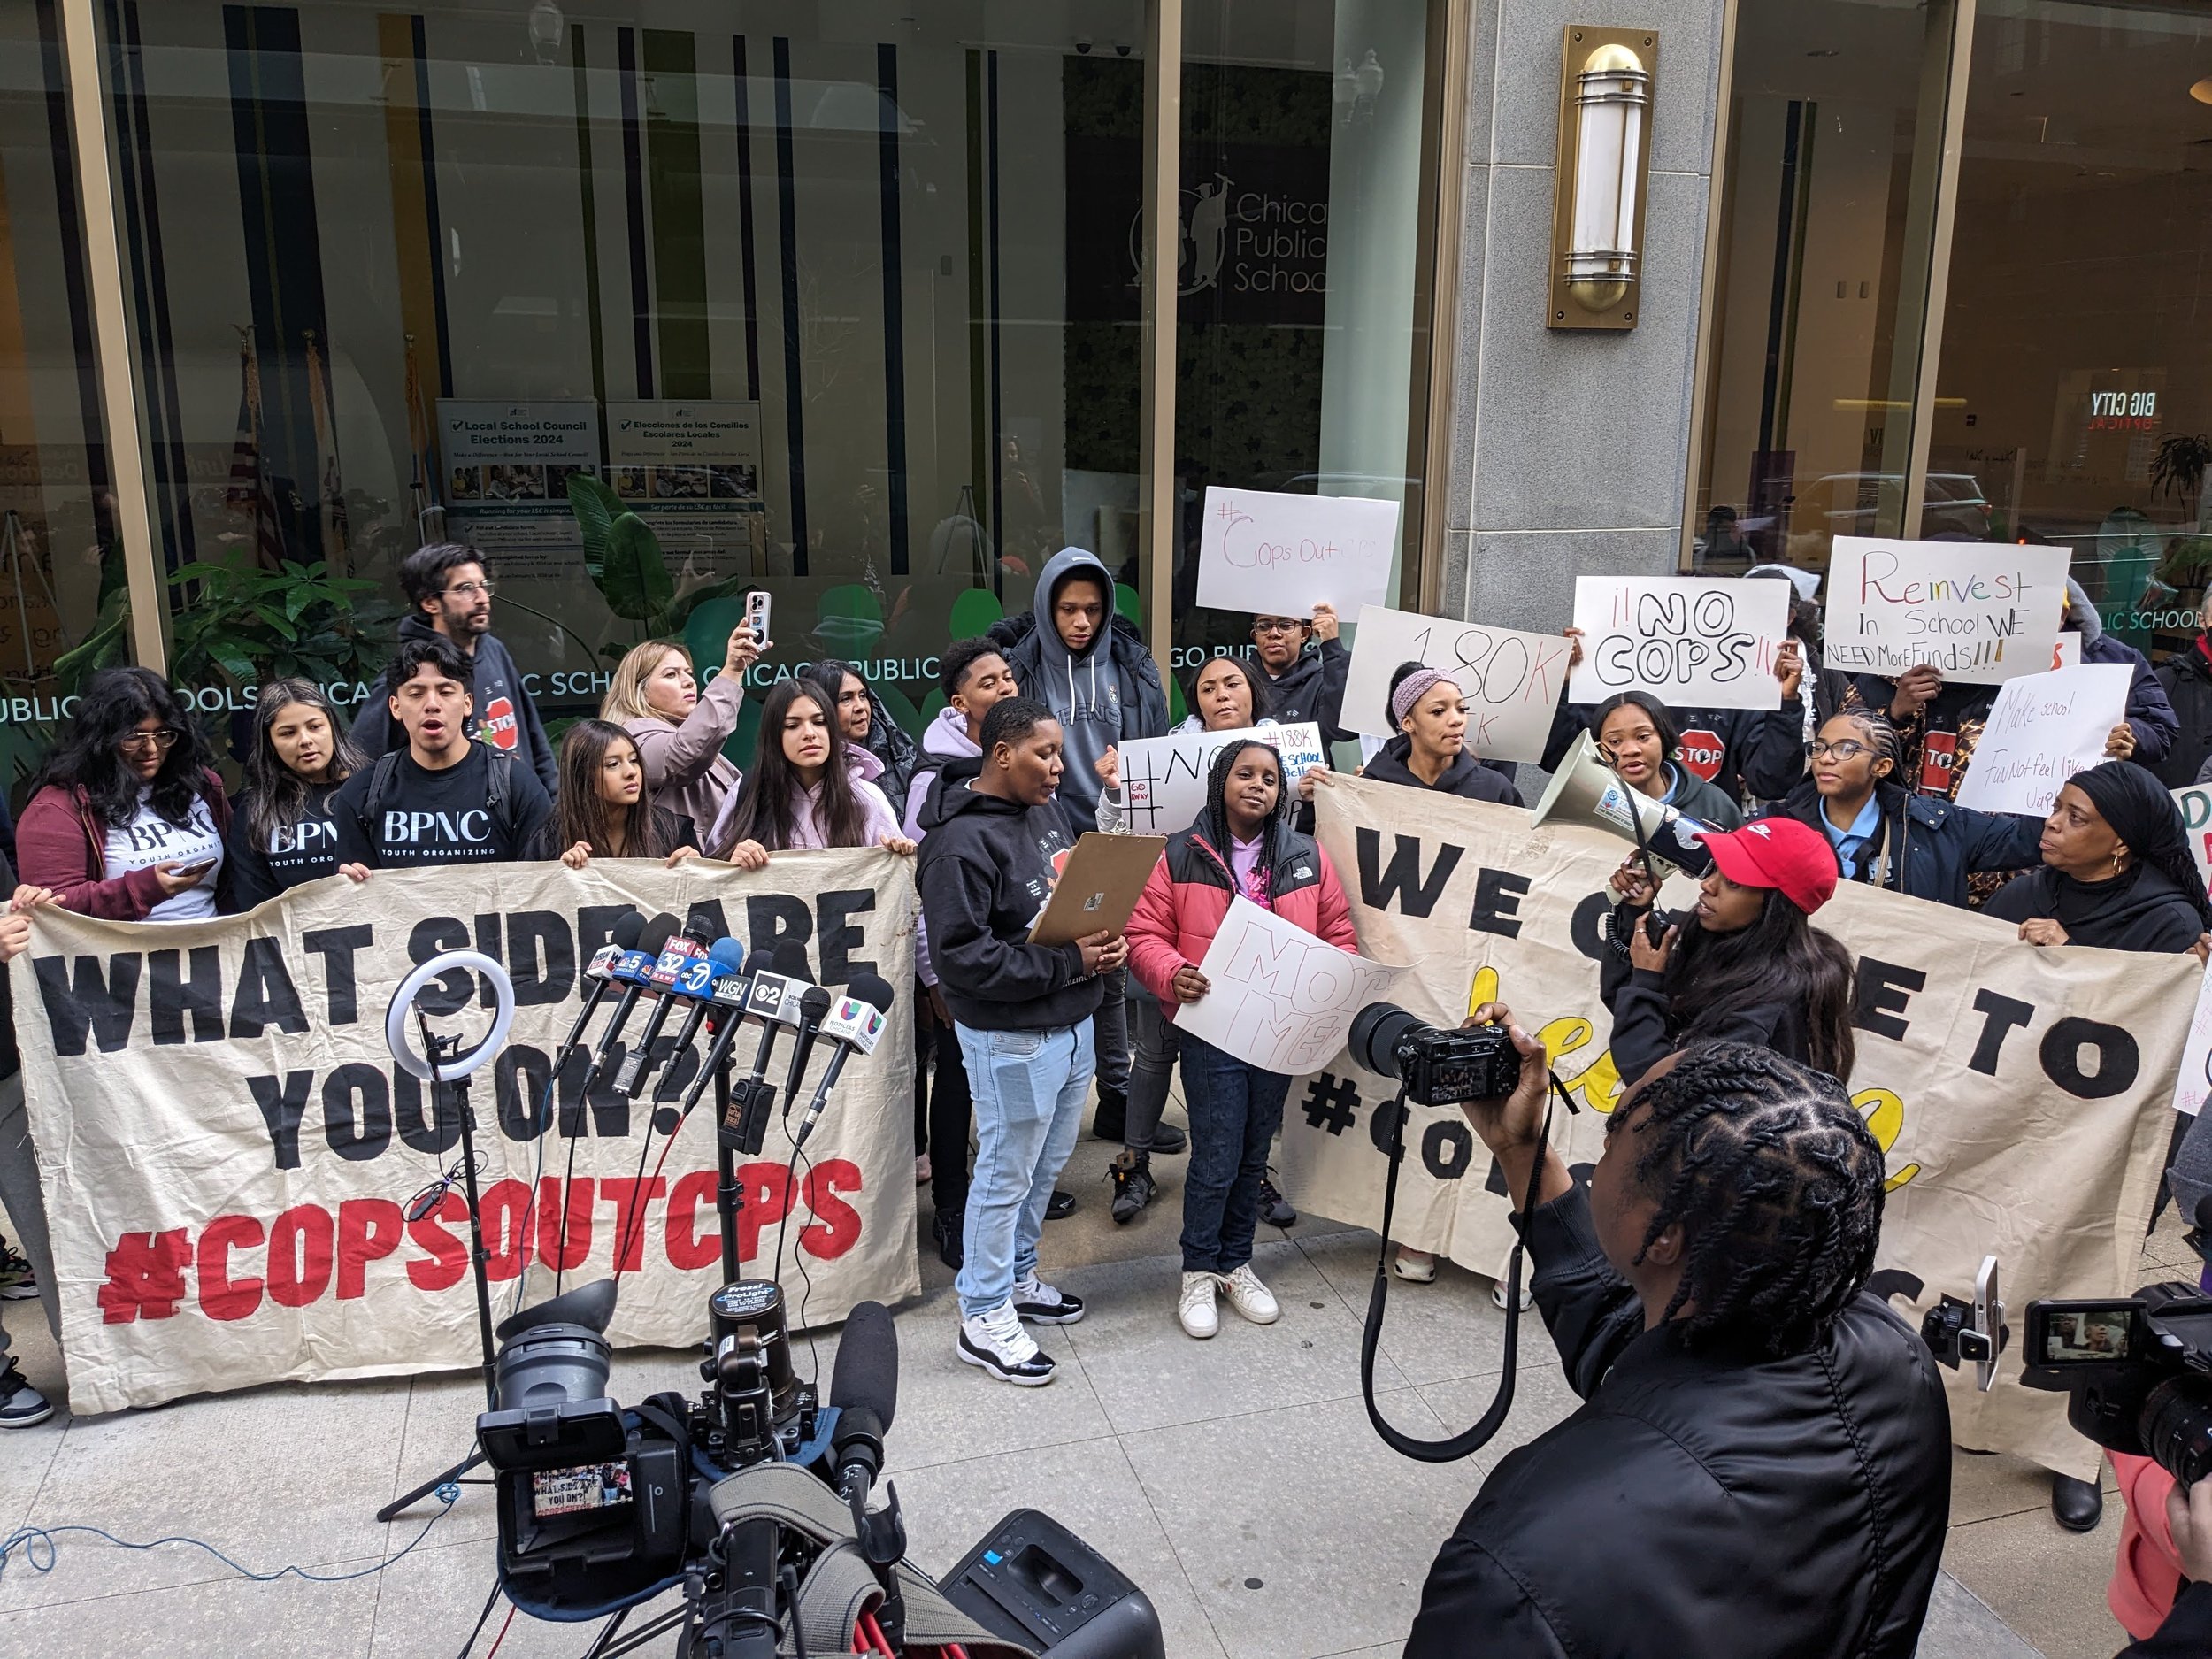   Yanni Butler, STOP’s first youth organizer on the the #CopsOutCPS campaign, leads chants  